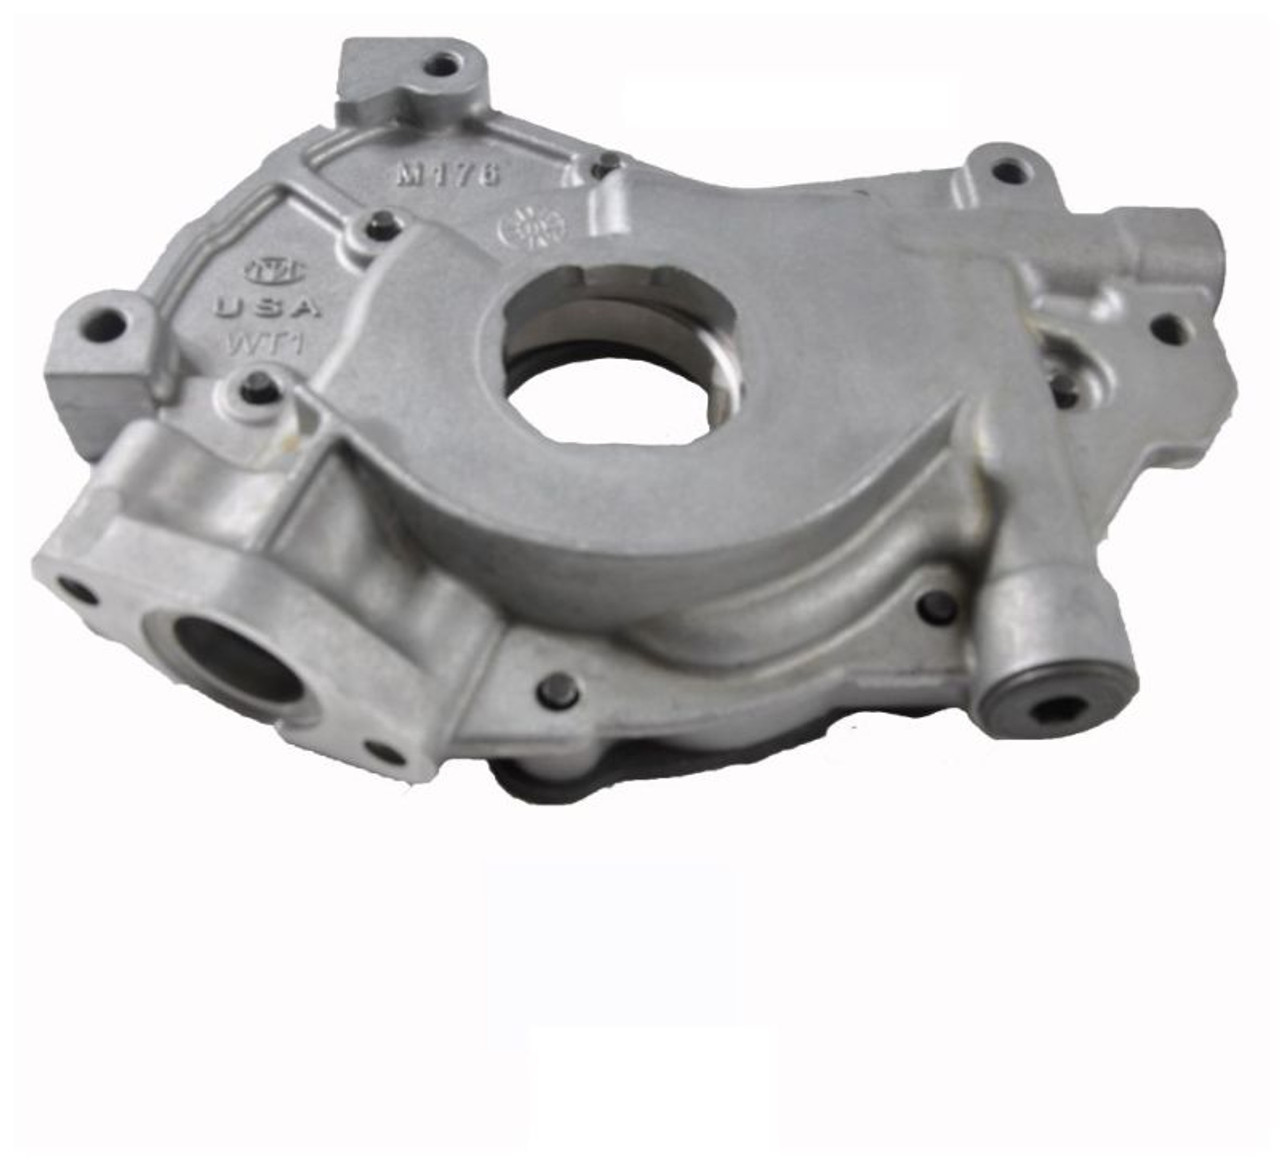 2000 Ford Expedition 5.4L Engine Oil Pump EP176 -122